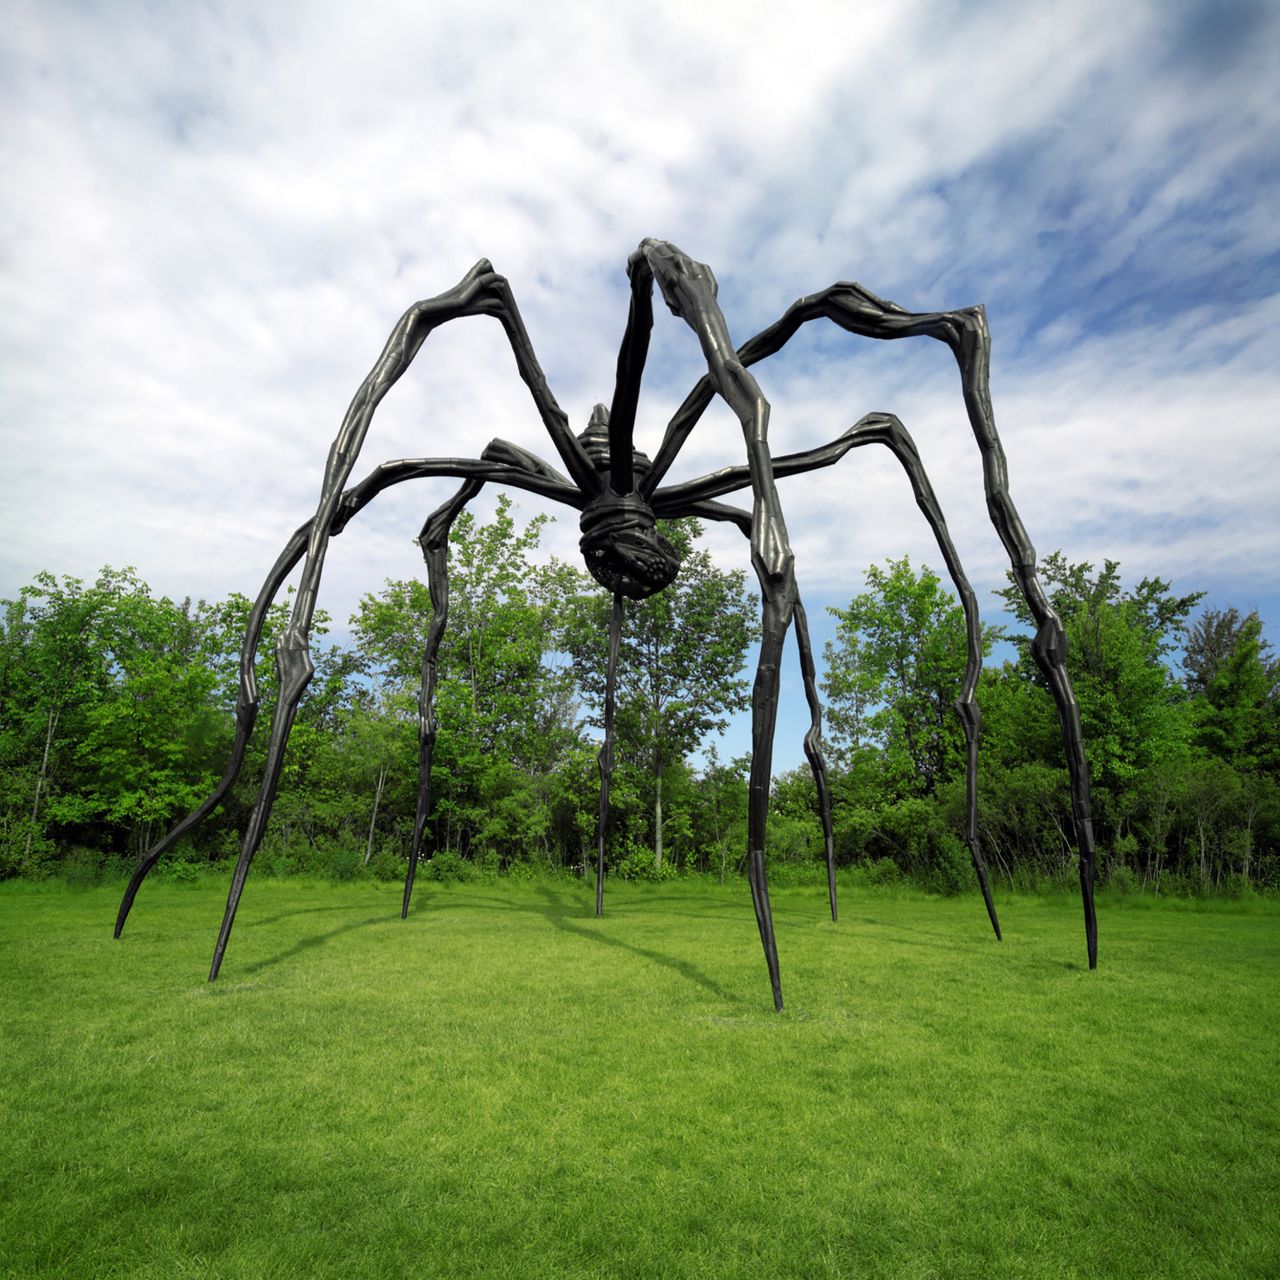 "MAMAN" is the largest sculpture in the series. Bourgeois' spiders range from spindly arachnids shown indoors to towering alien-like forms.